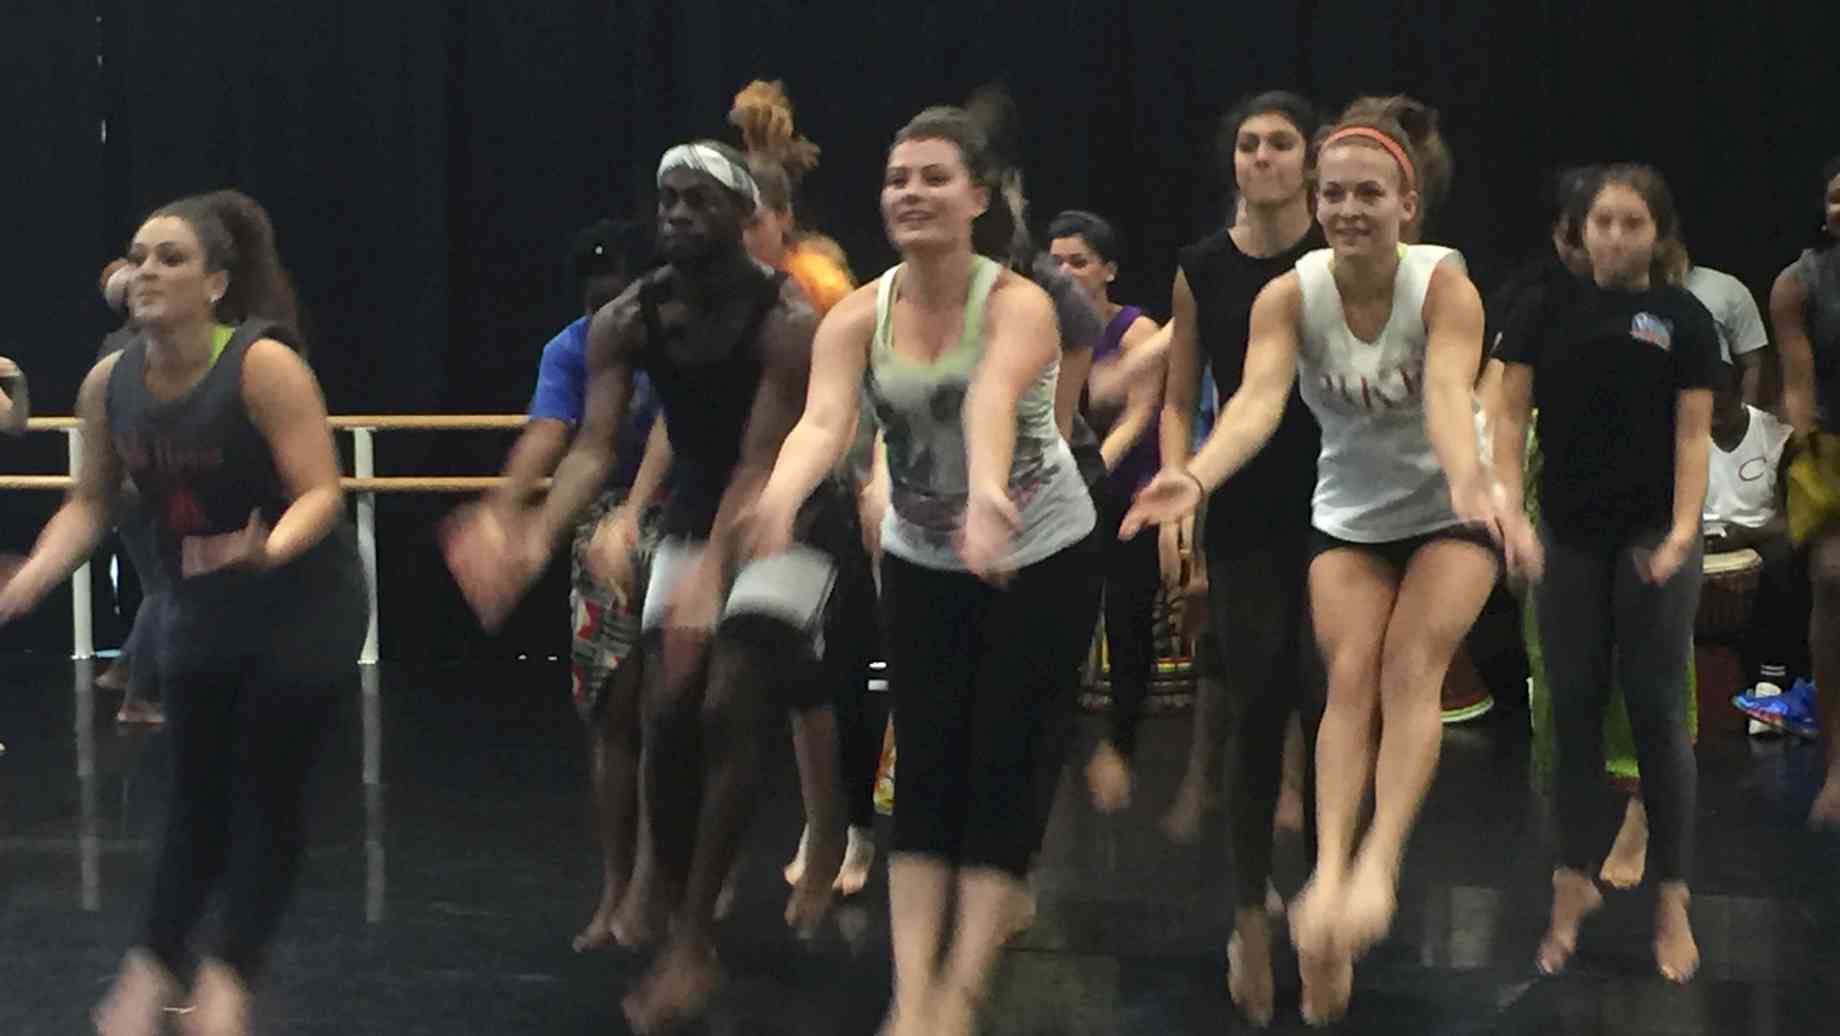 West African Dance students being instructed by Juliana Azoubel during her Guest Artist residency at UF in Fall 2016.